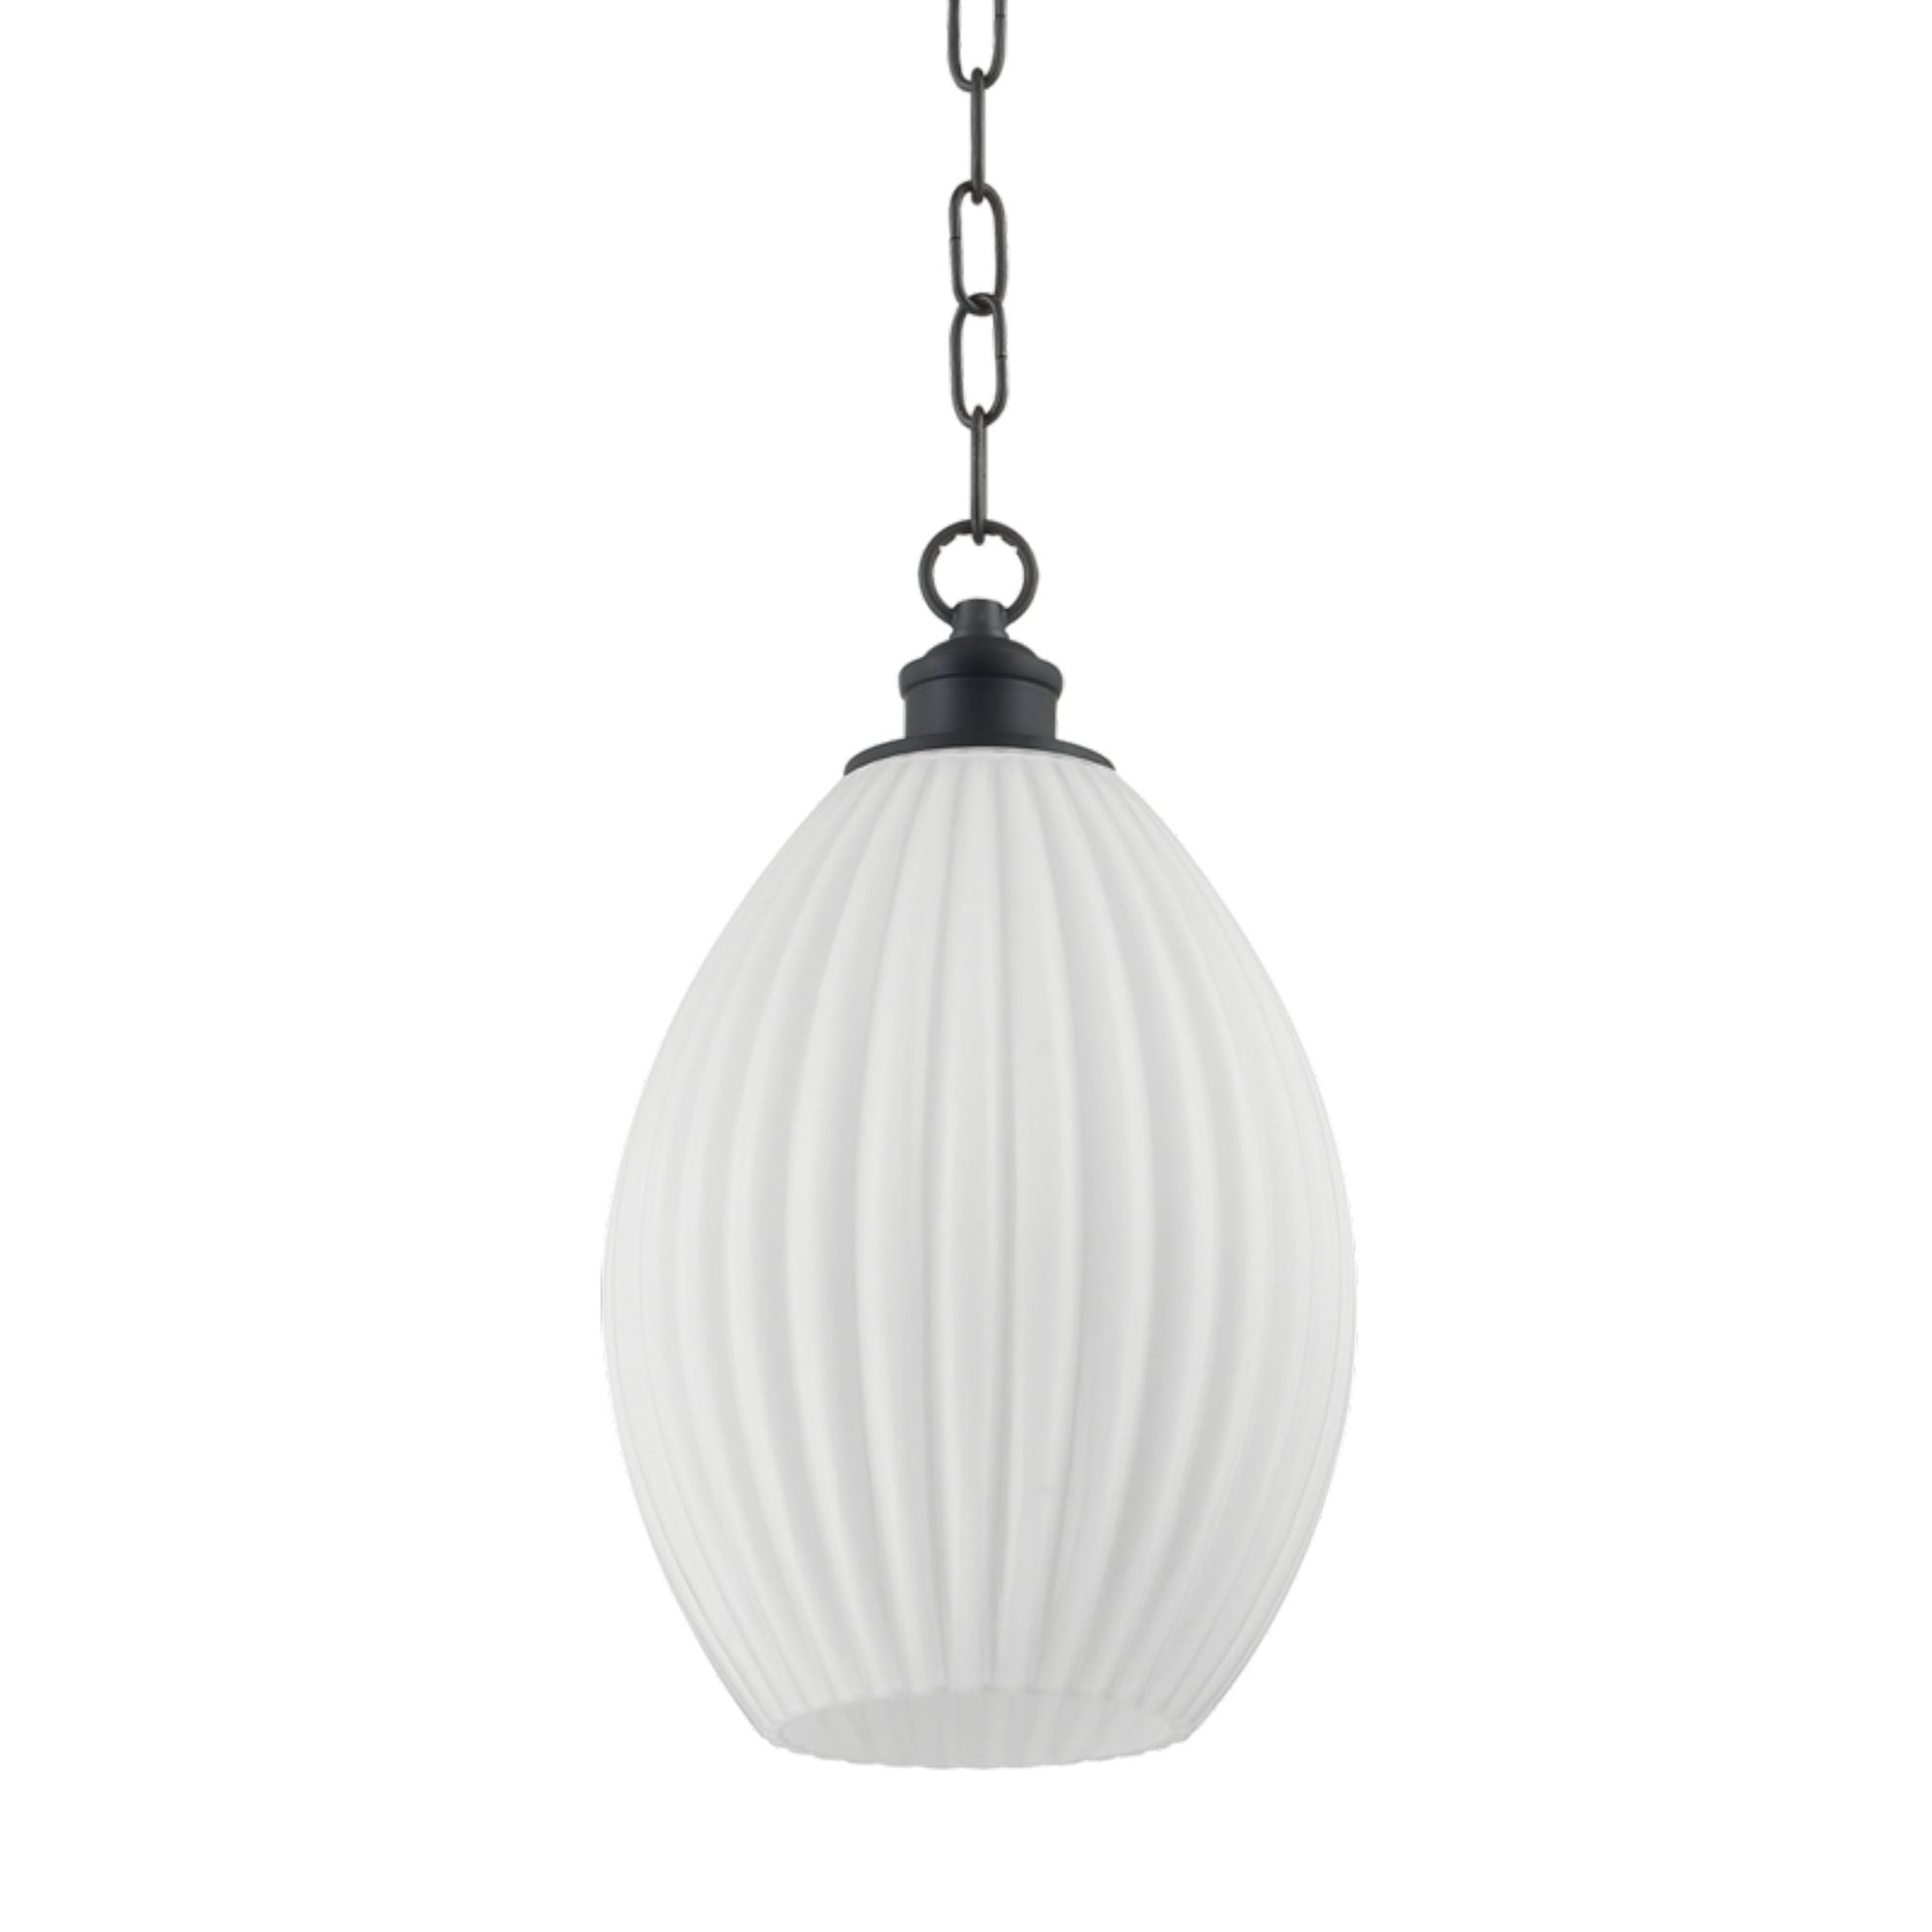 Hillary 1-Light Pendant in Old Bronze by Zio & Sons